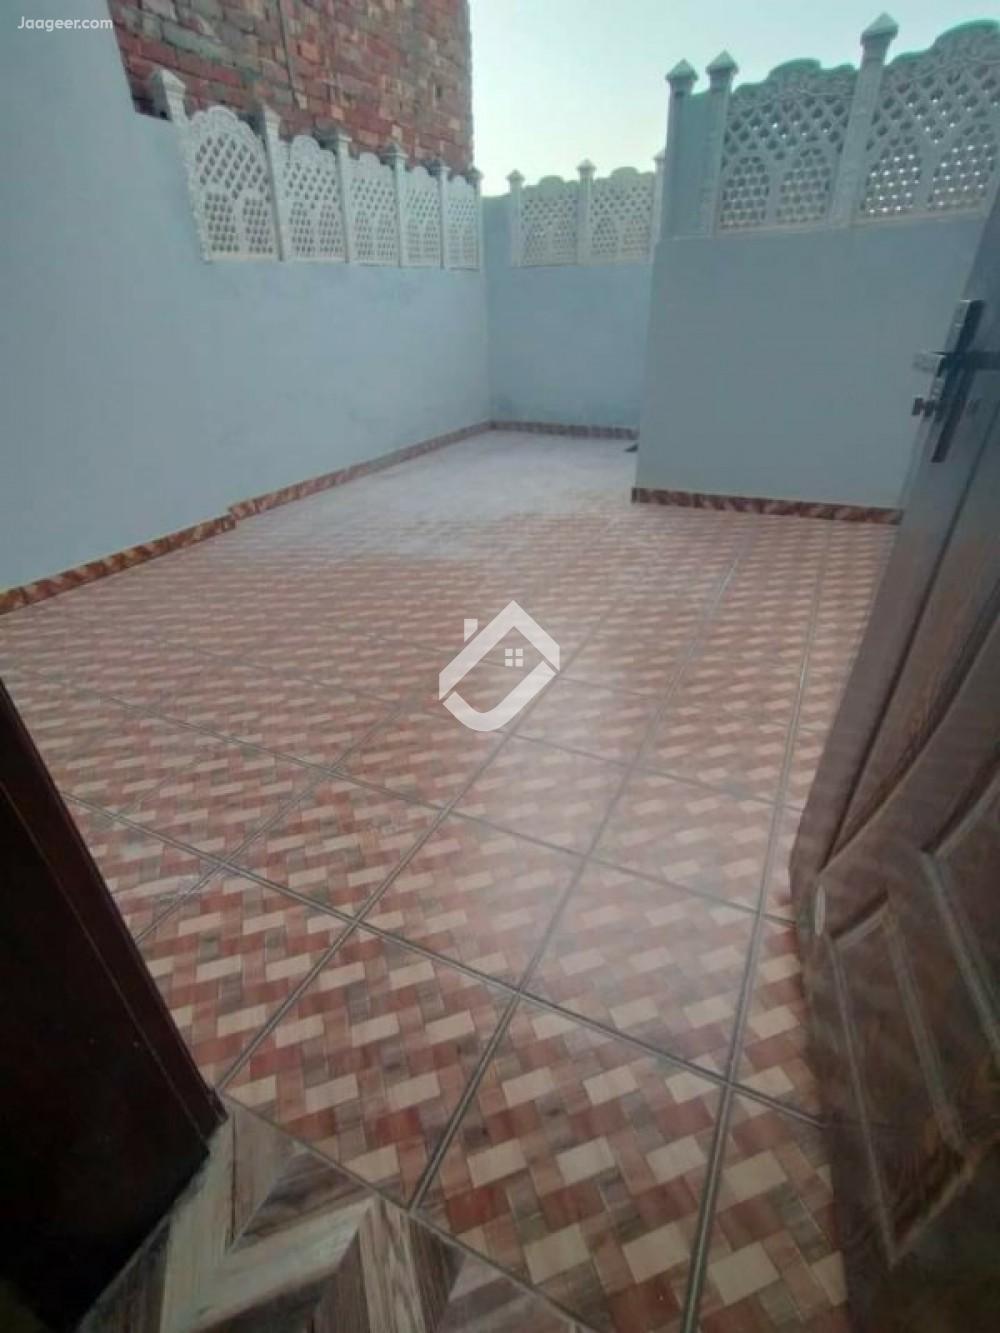 Main image 6 Marla Double Storey House For Sale In Ghagra Villas Society Ghagra Villas Society, Multan